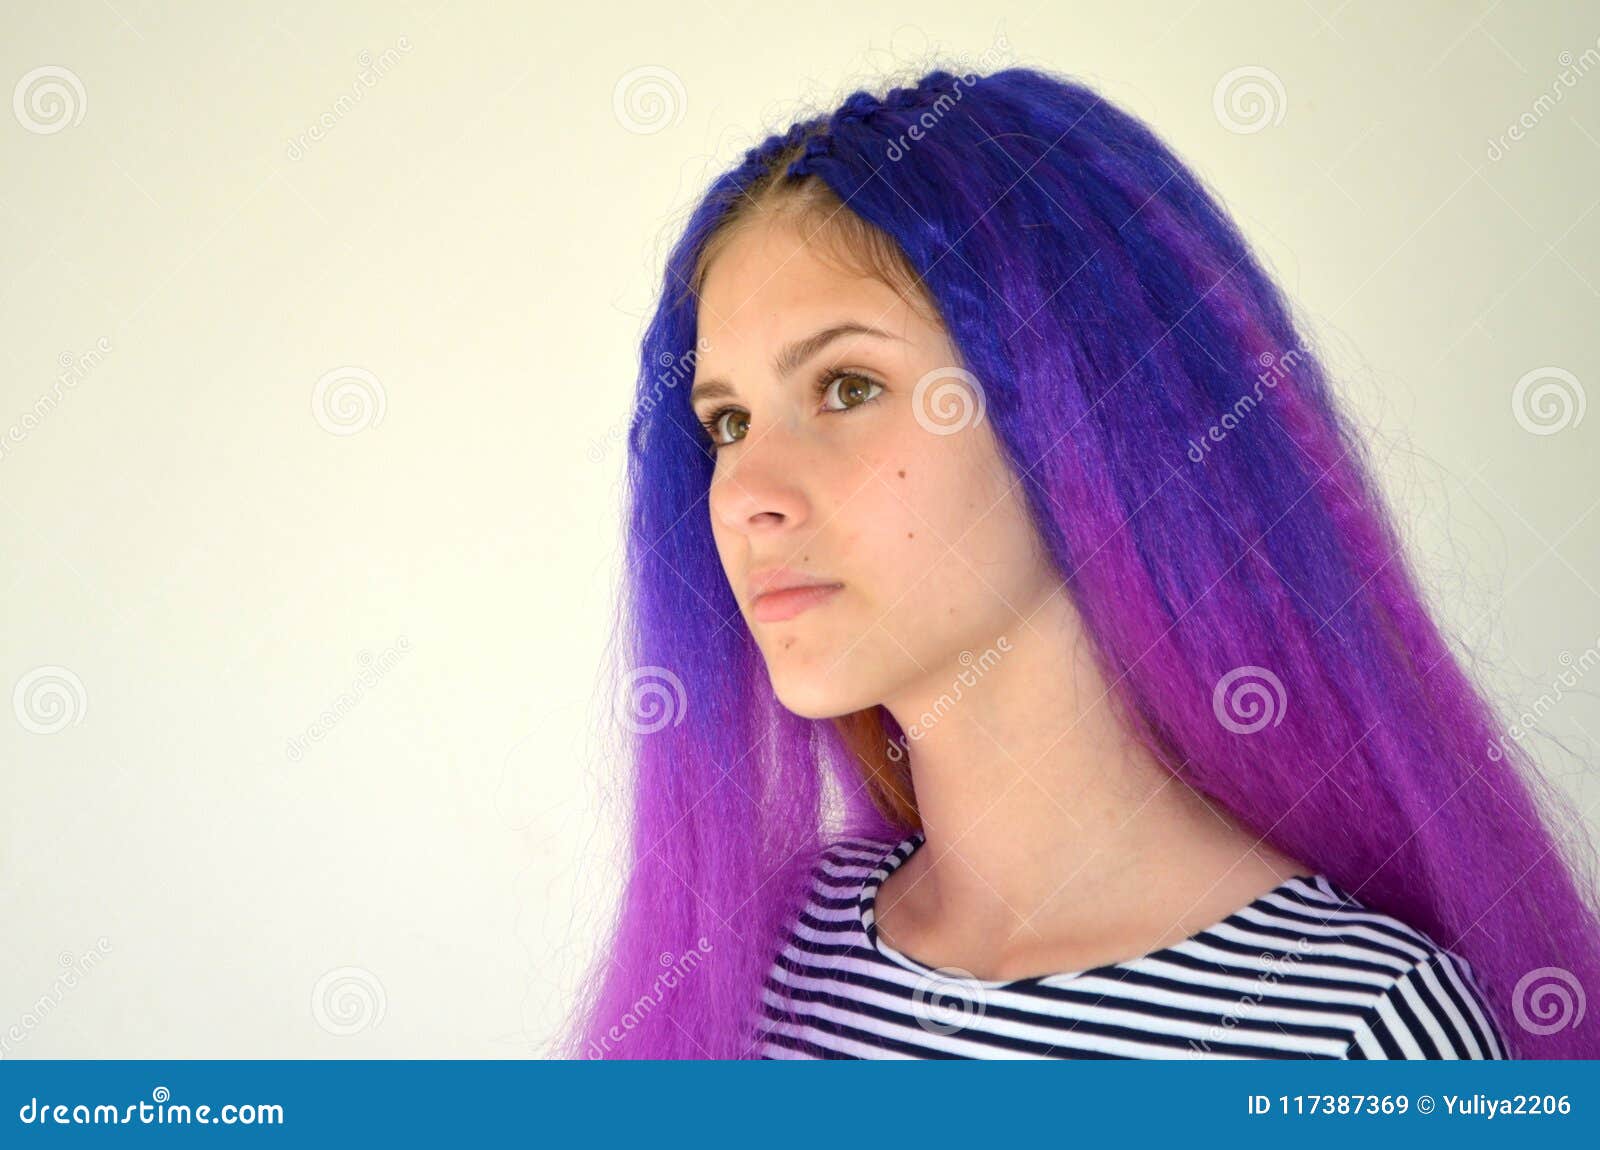 Blue and Purple Hair Extensions - wide 5